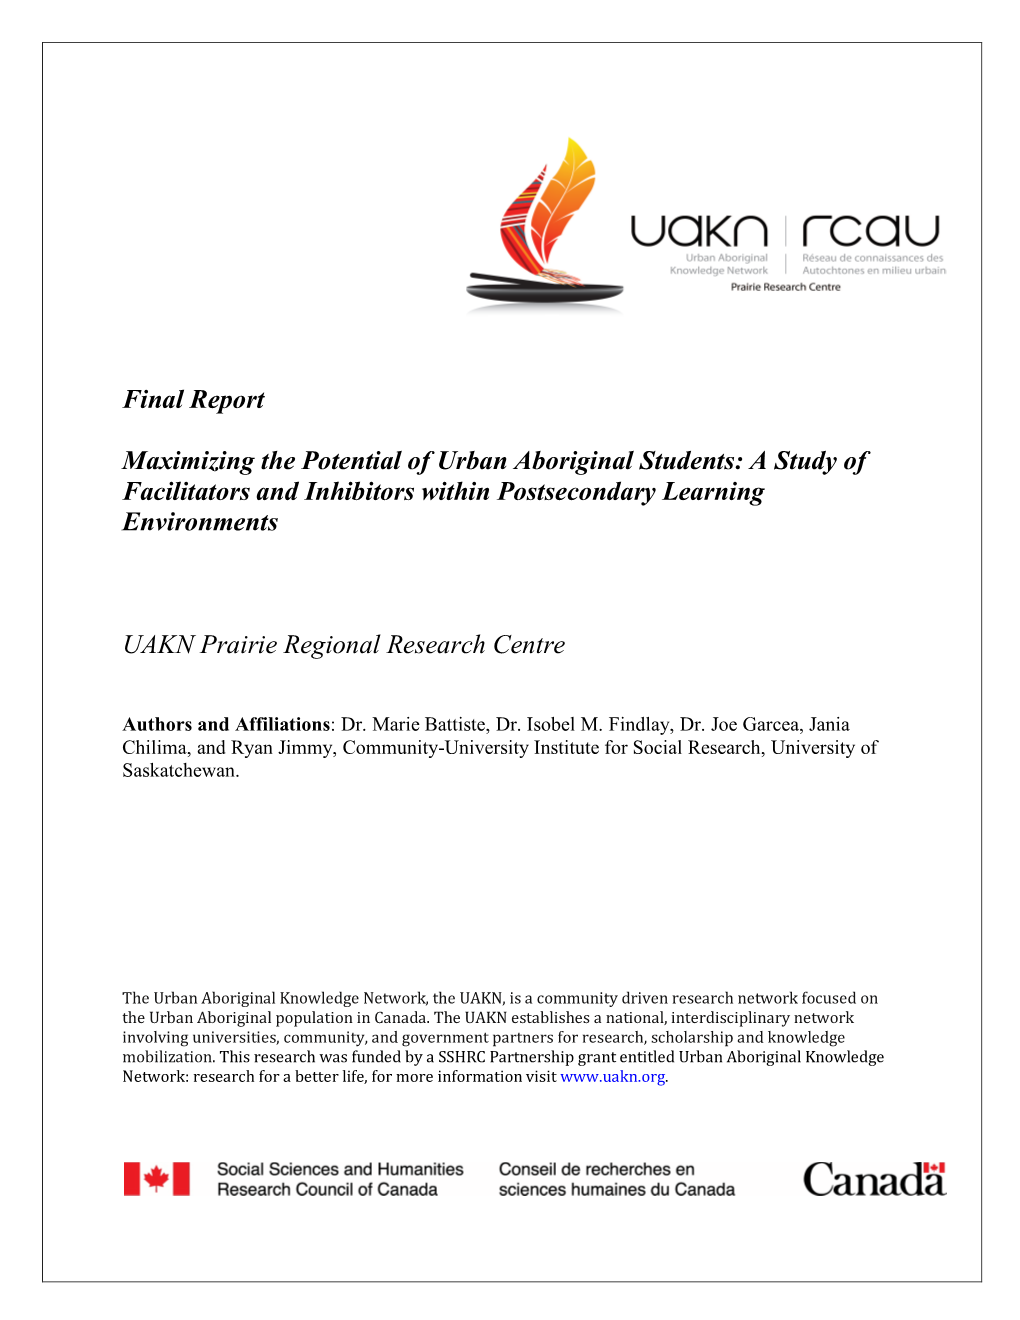 Final Report Maximizing the Potential of Urban Aboriginal Students: A